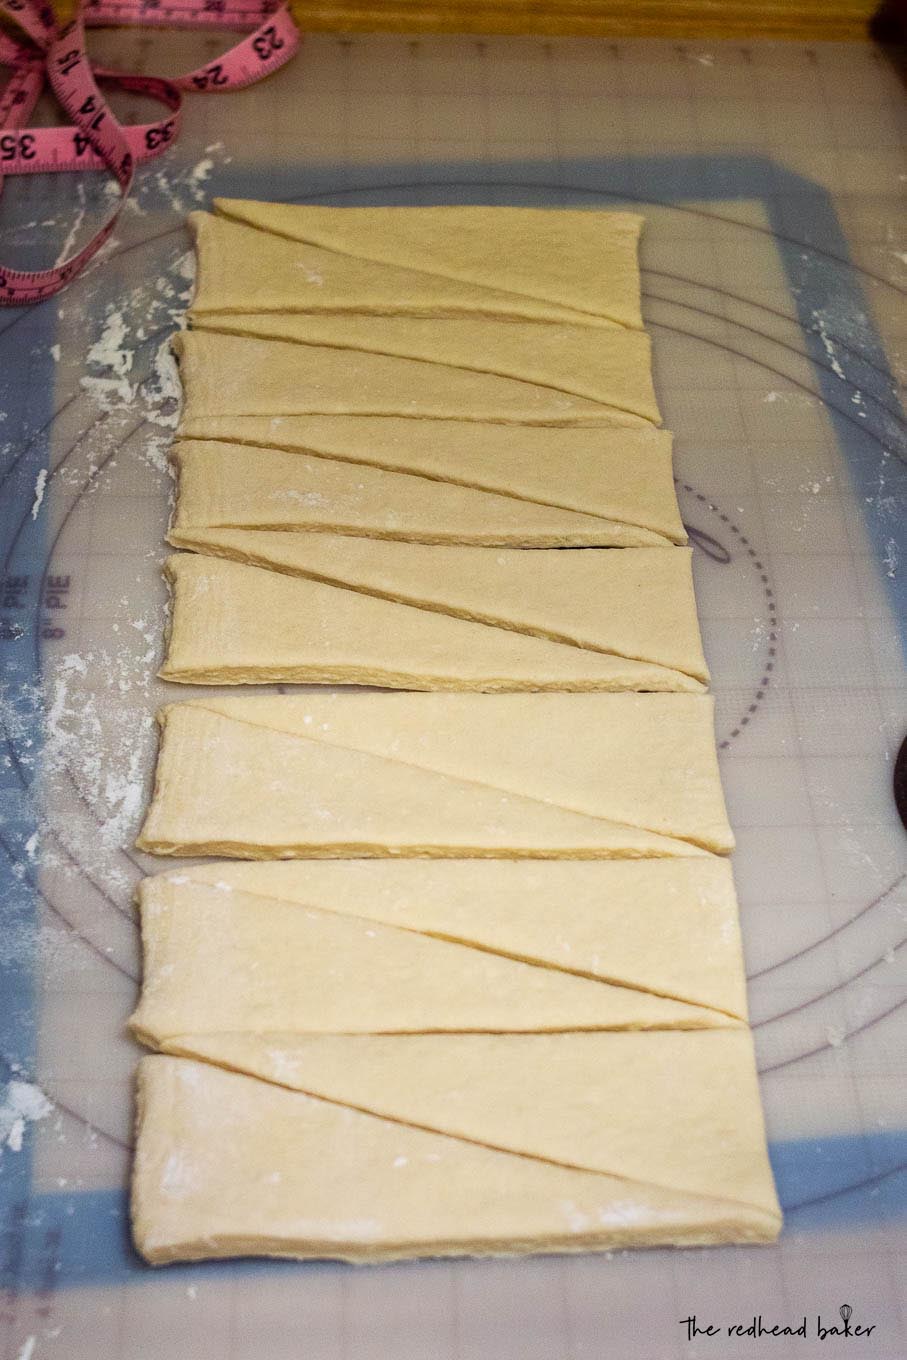 A strip of croissant dough cut into triangles.